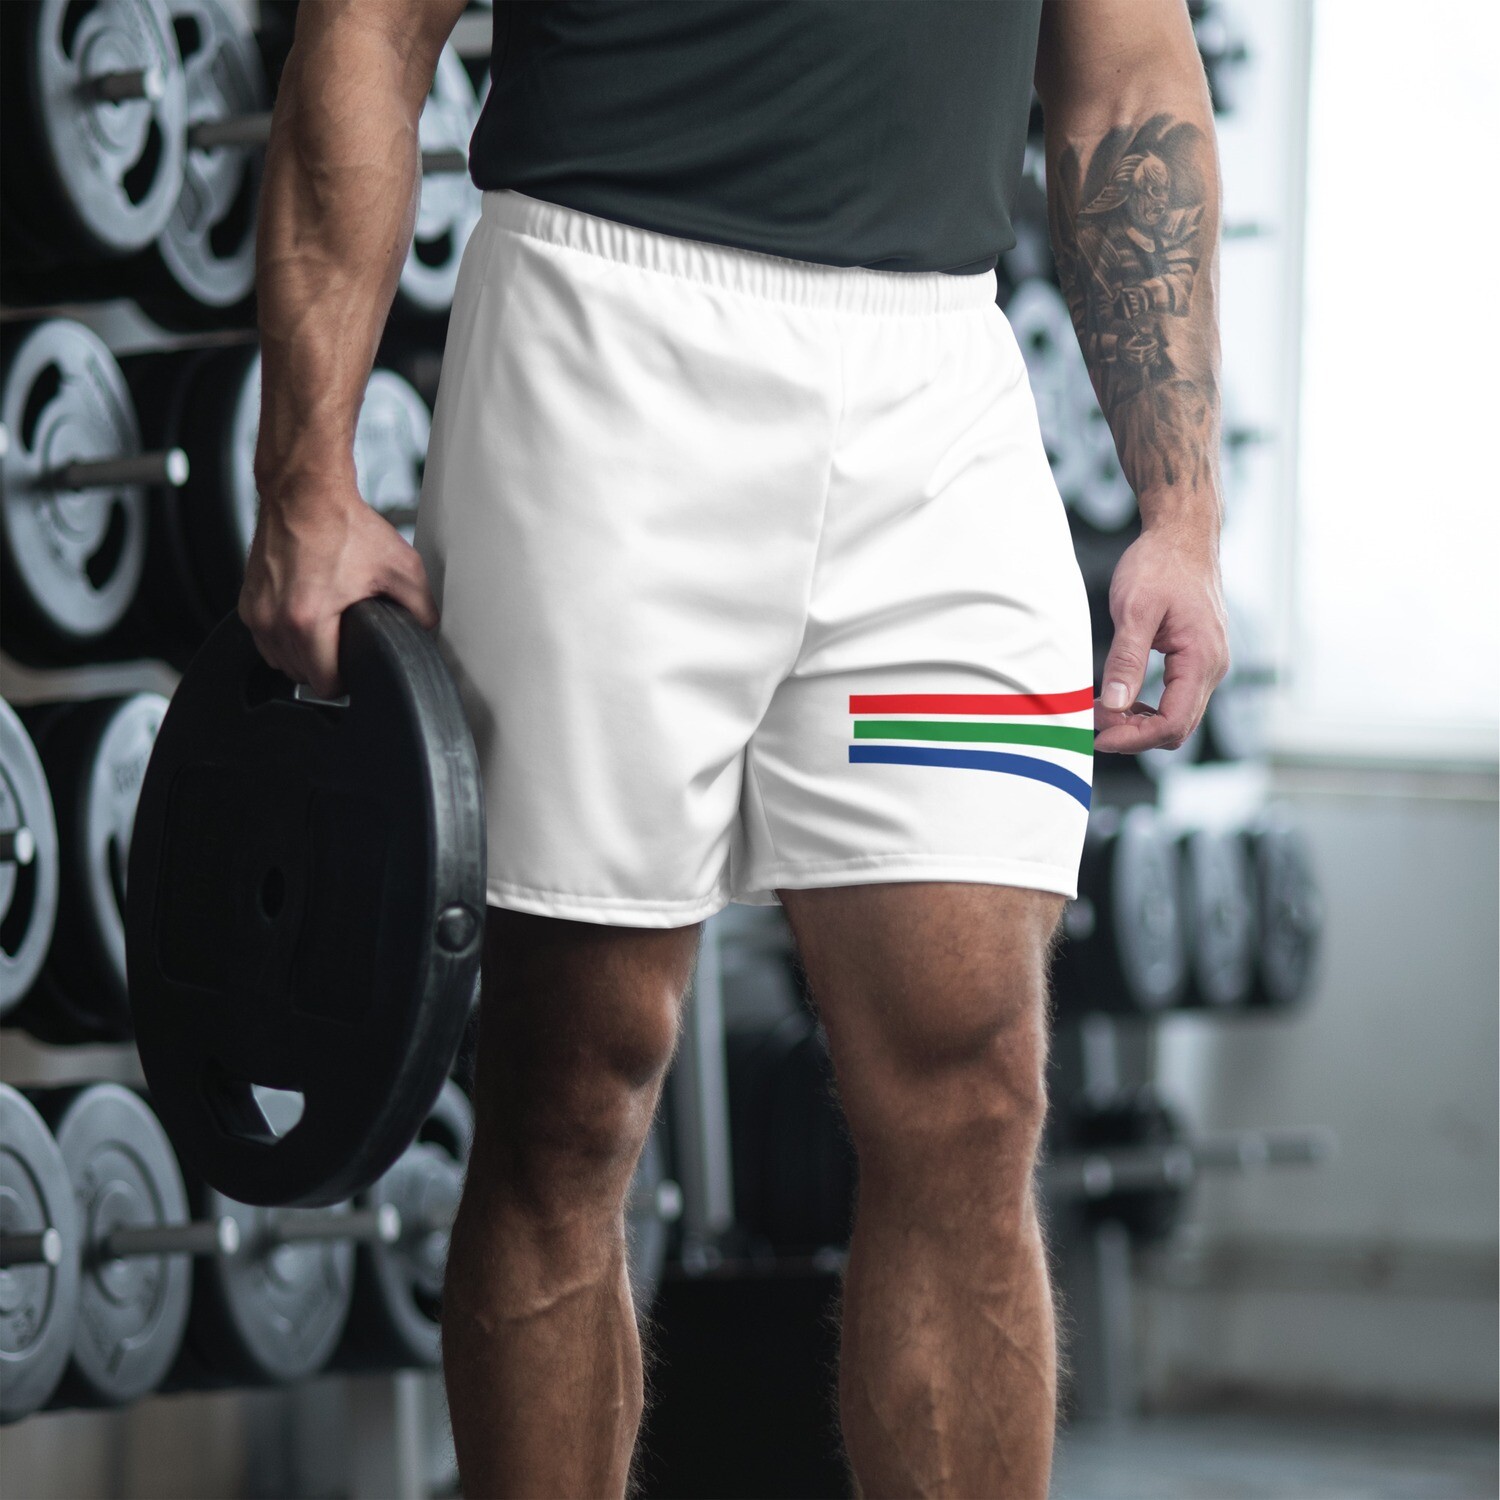 The APEX Blank Men's Recycled Athletic Shorts